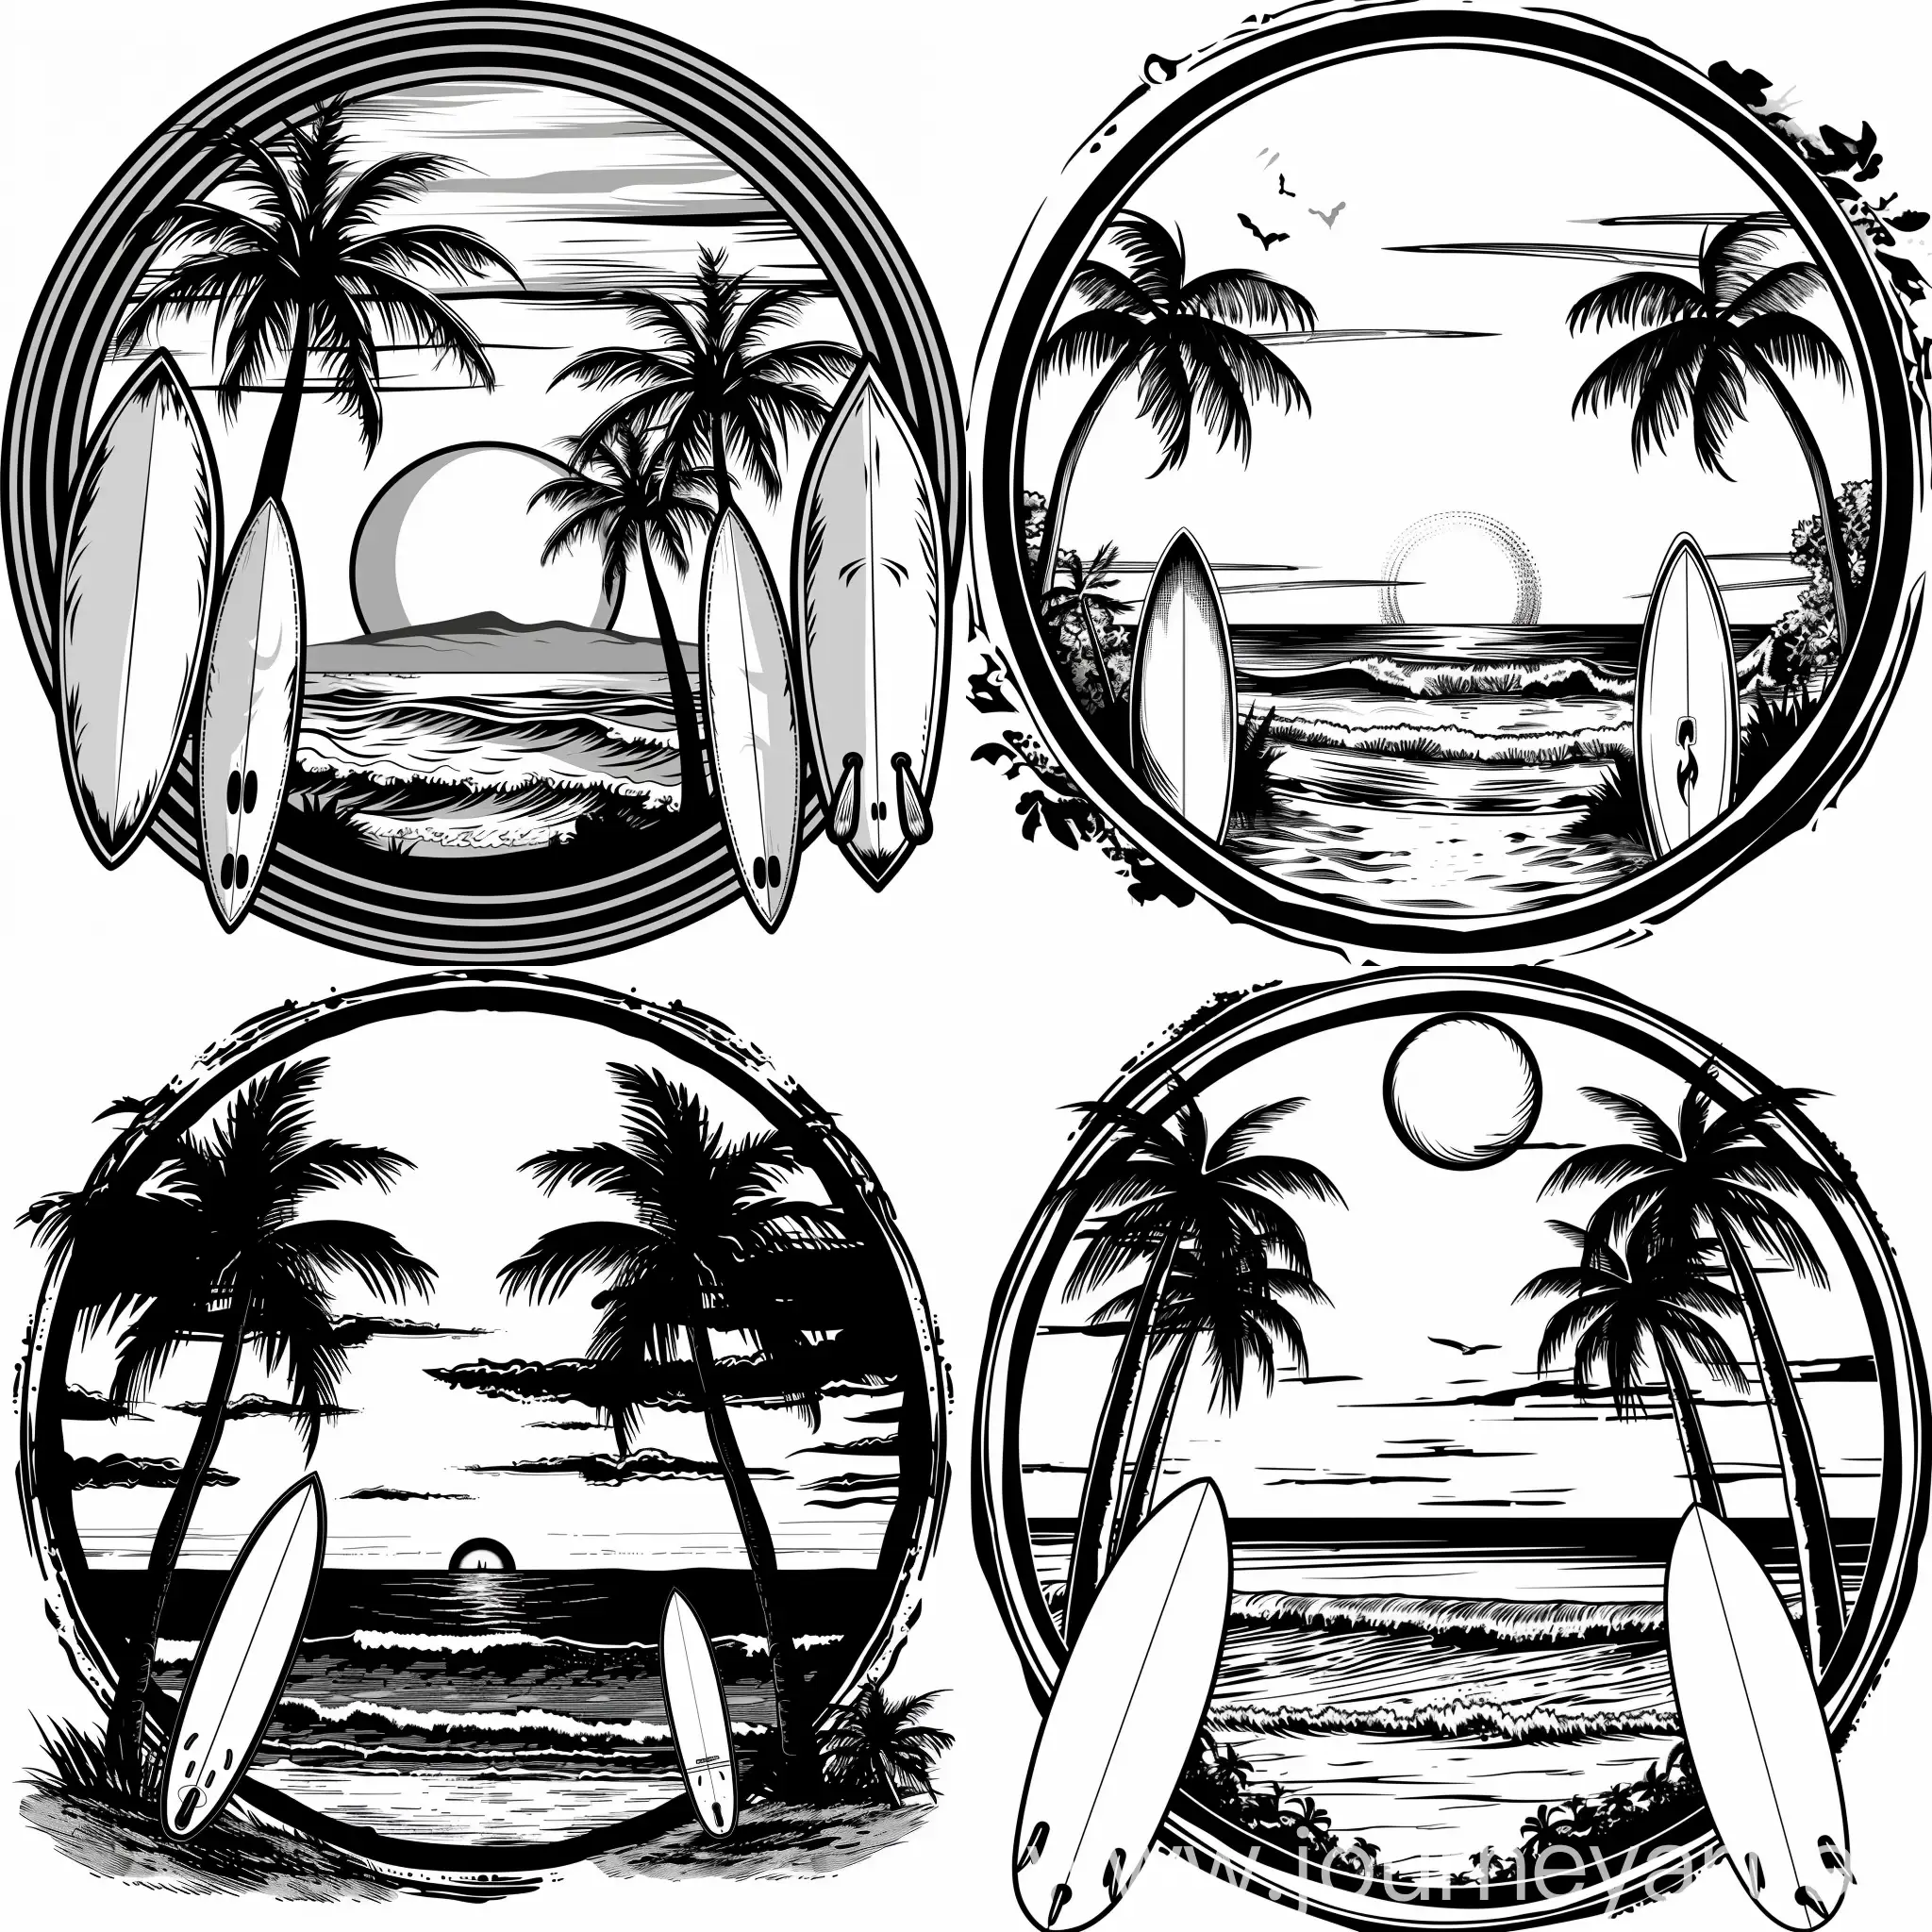 Cartoon of beach landscape ocean waves sunset palm trees surfboards in black and white in a circle frame